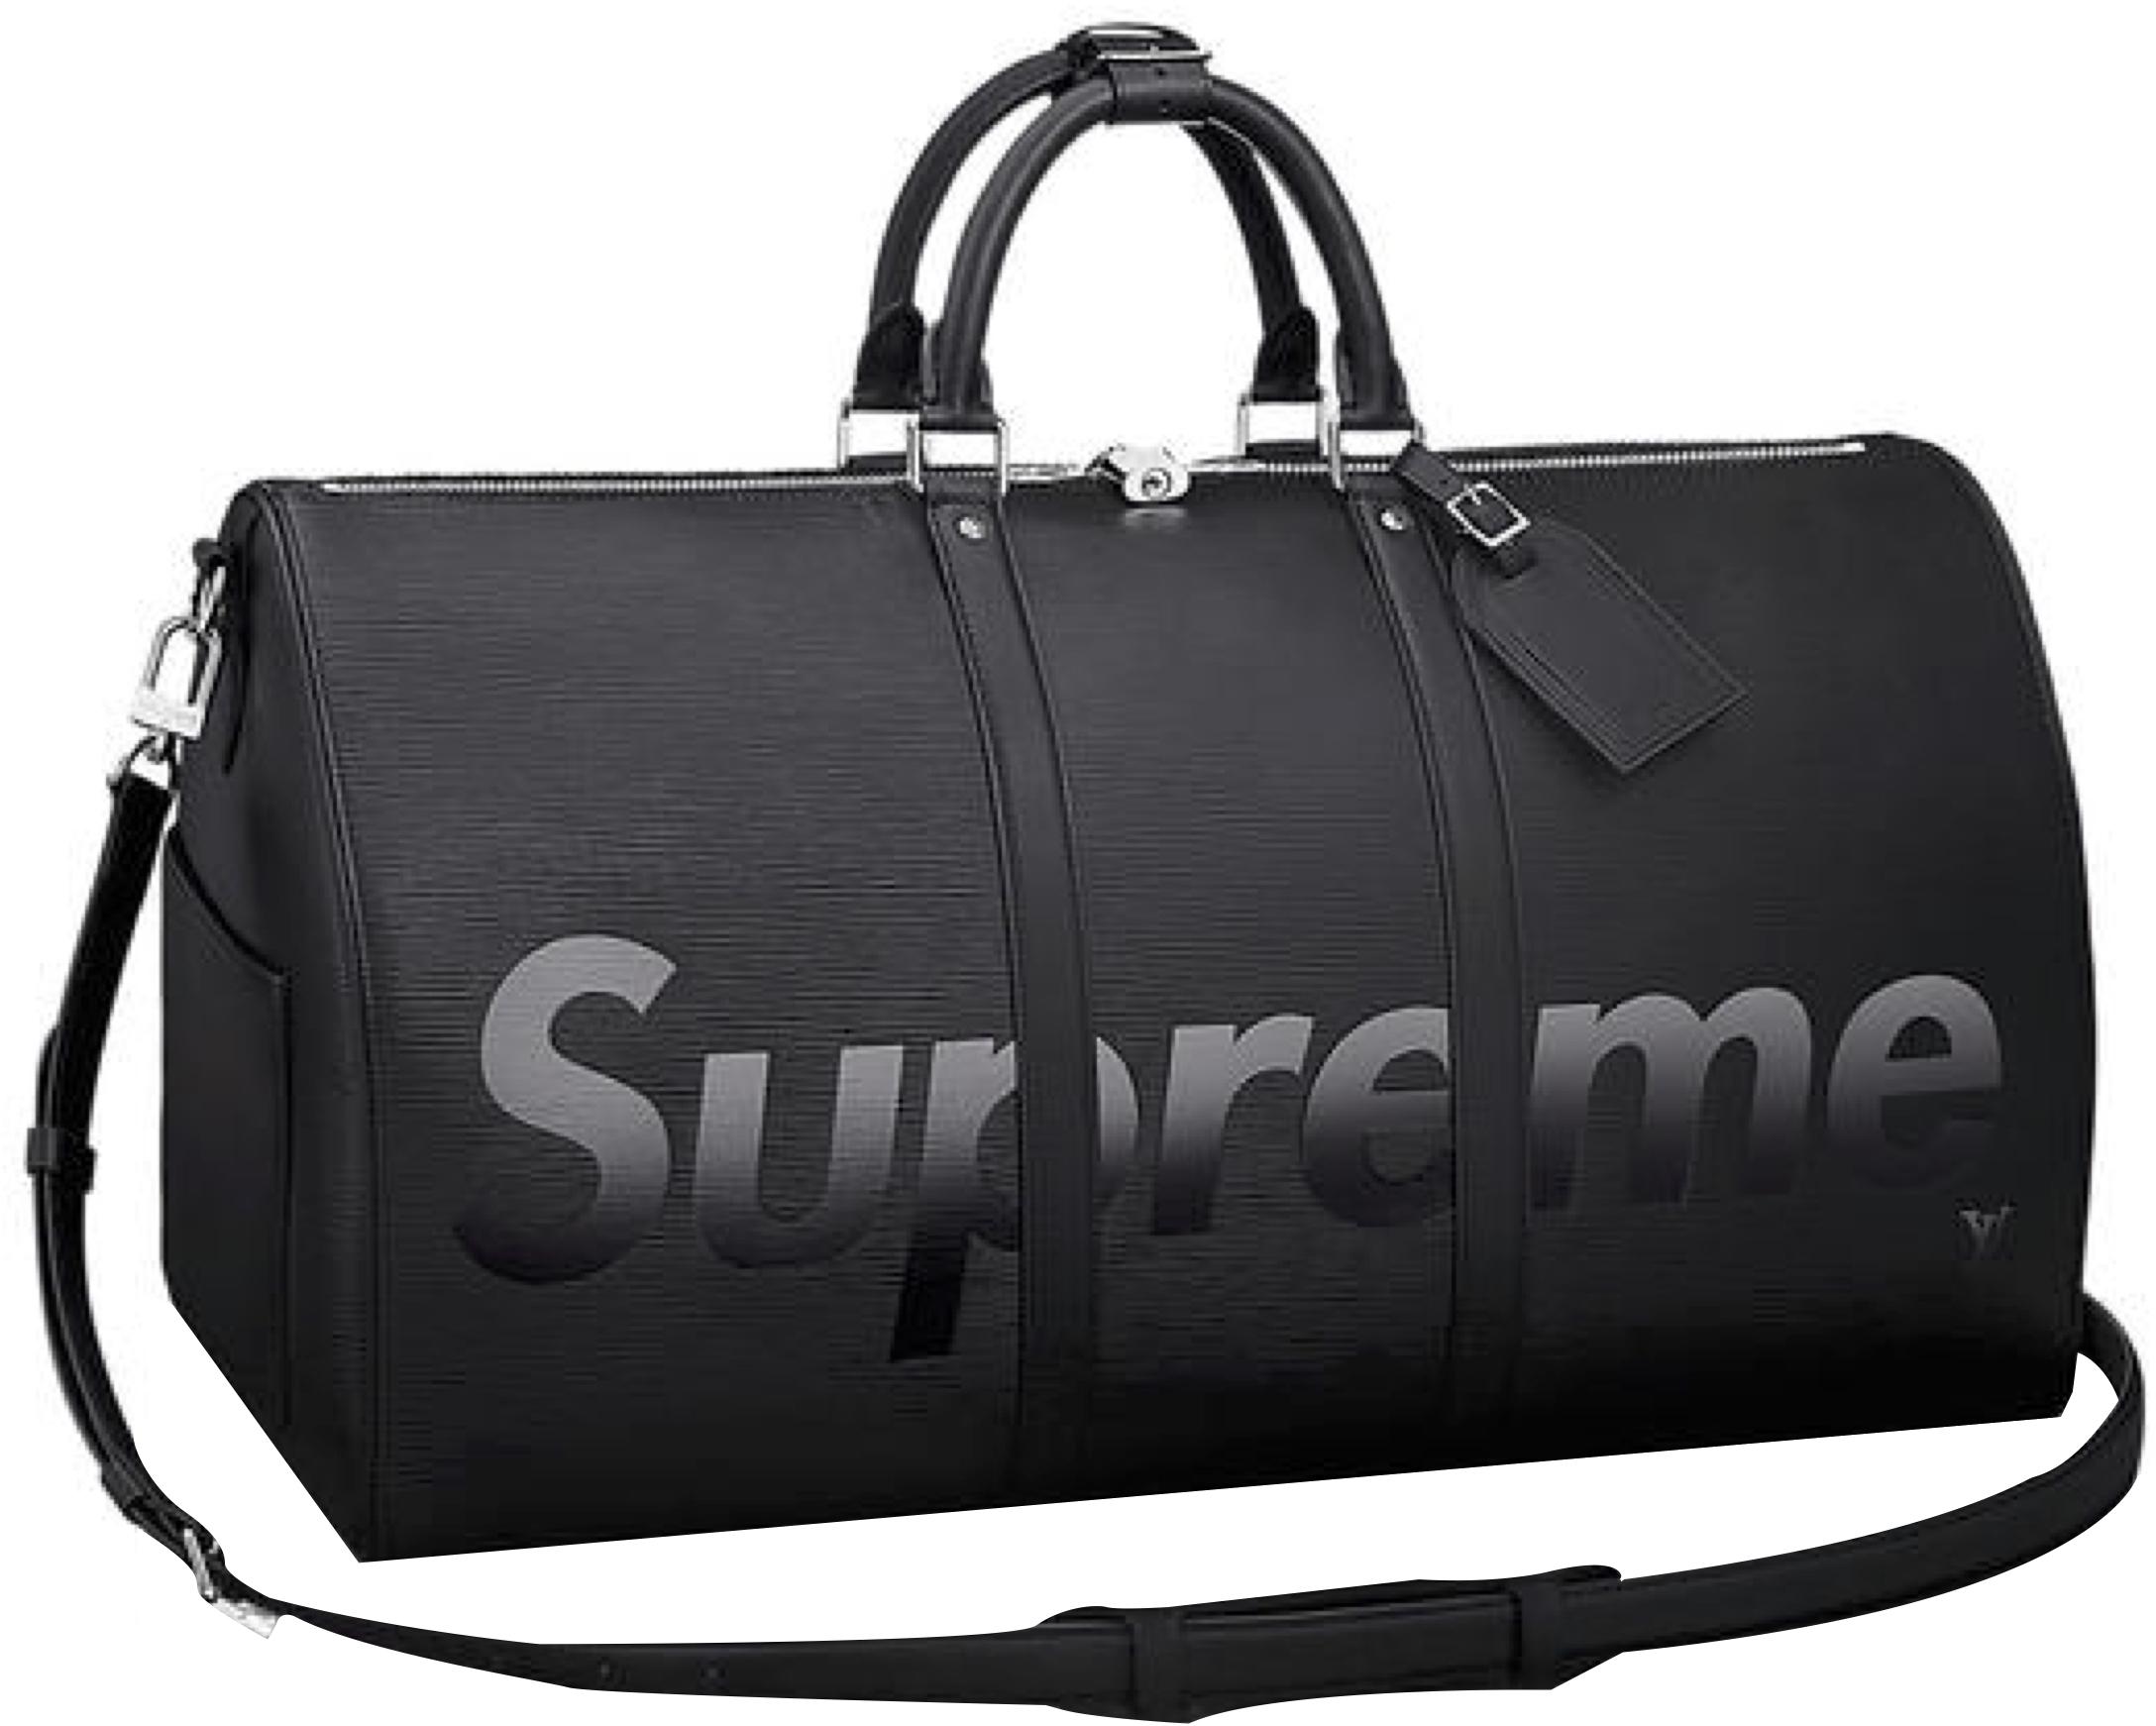 Supreme Leather Louis Vuitton X Keepall Bandouliere Epi 55 in Black for Men - Save 4% - Lyst